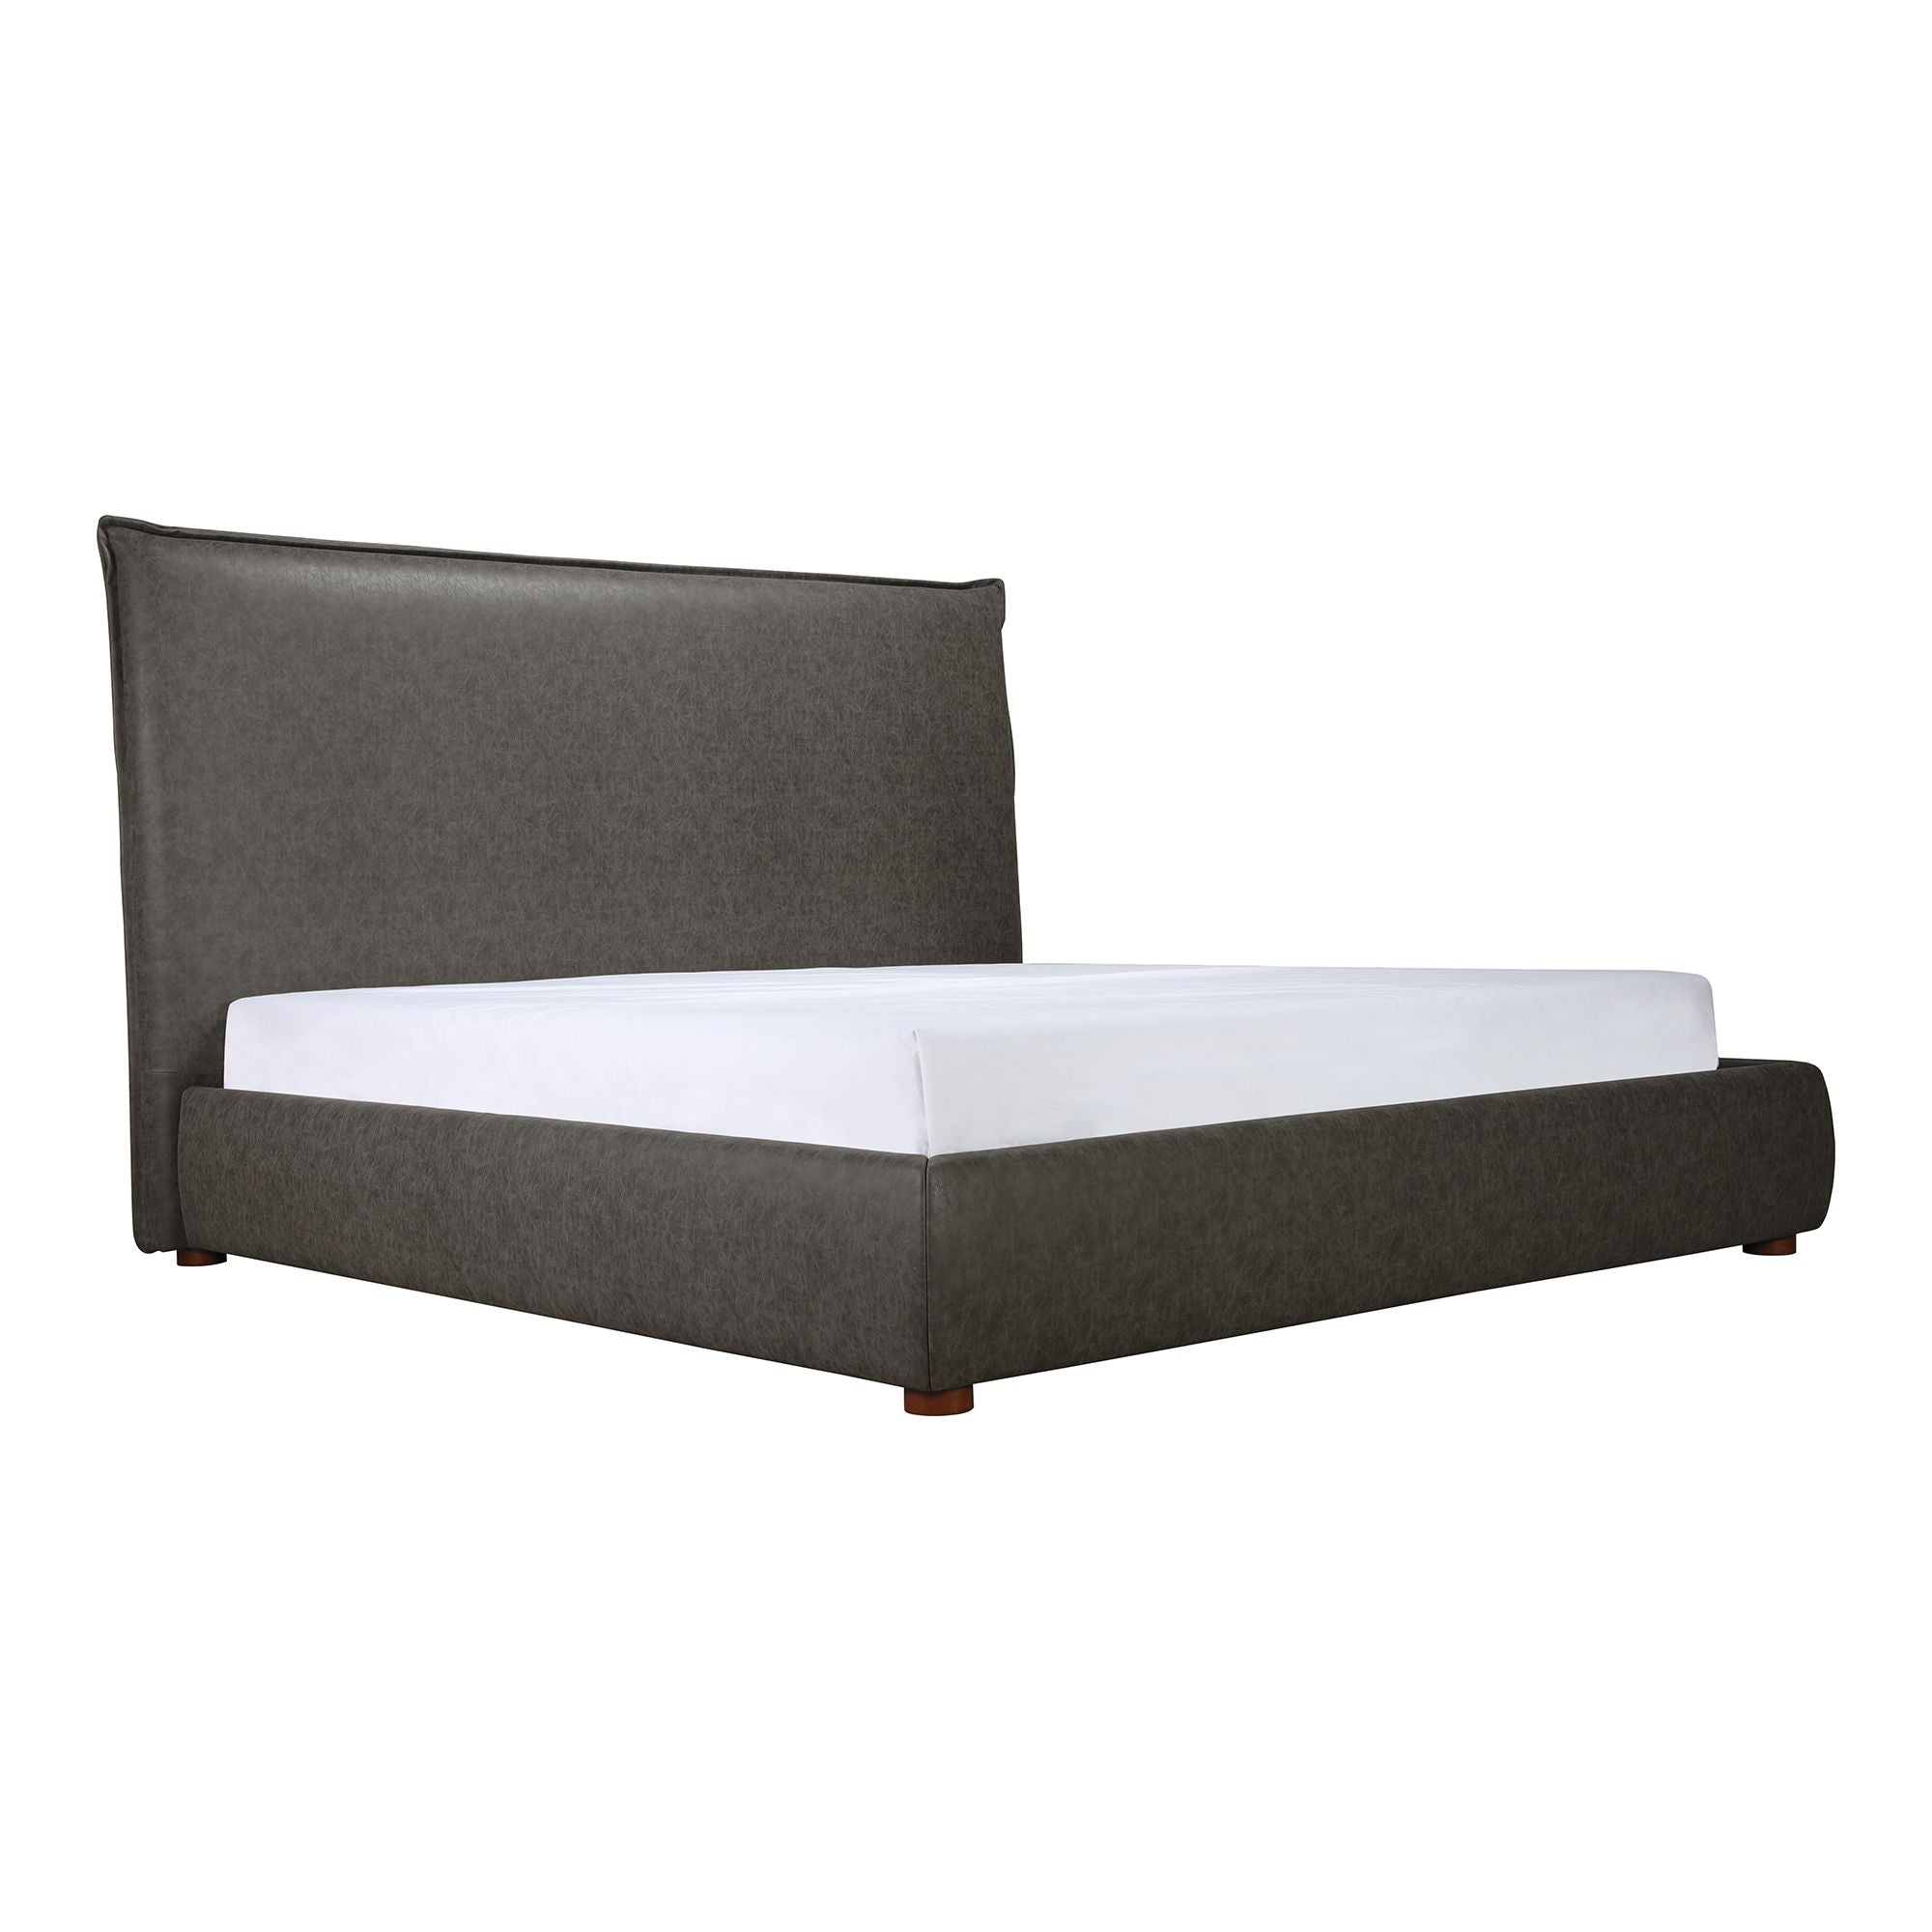 Luzon - Queen Bed Tall Headboard Vegan Leather - Slate